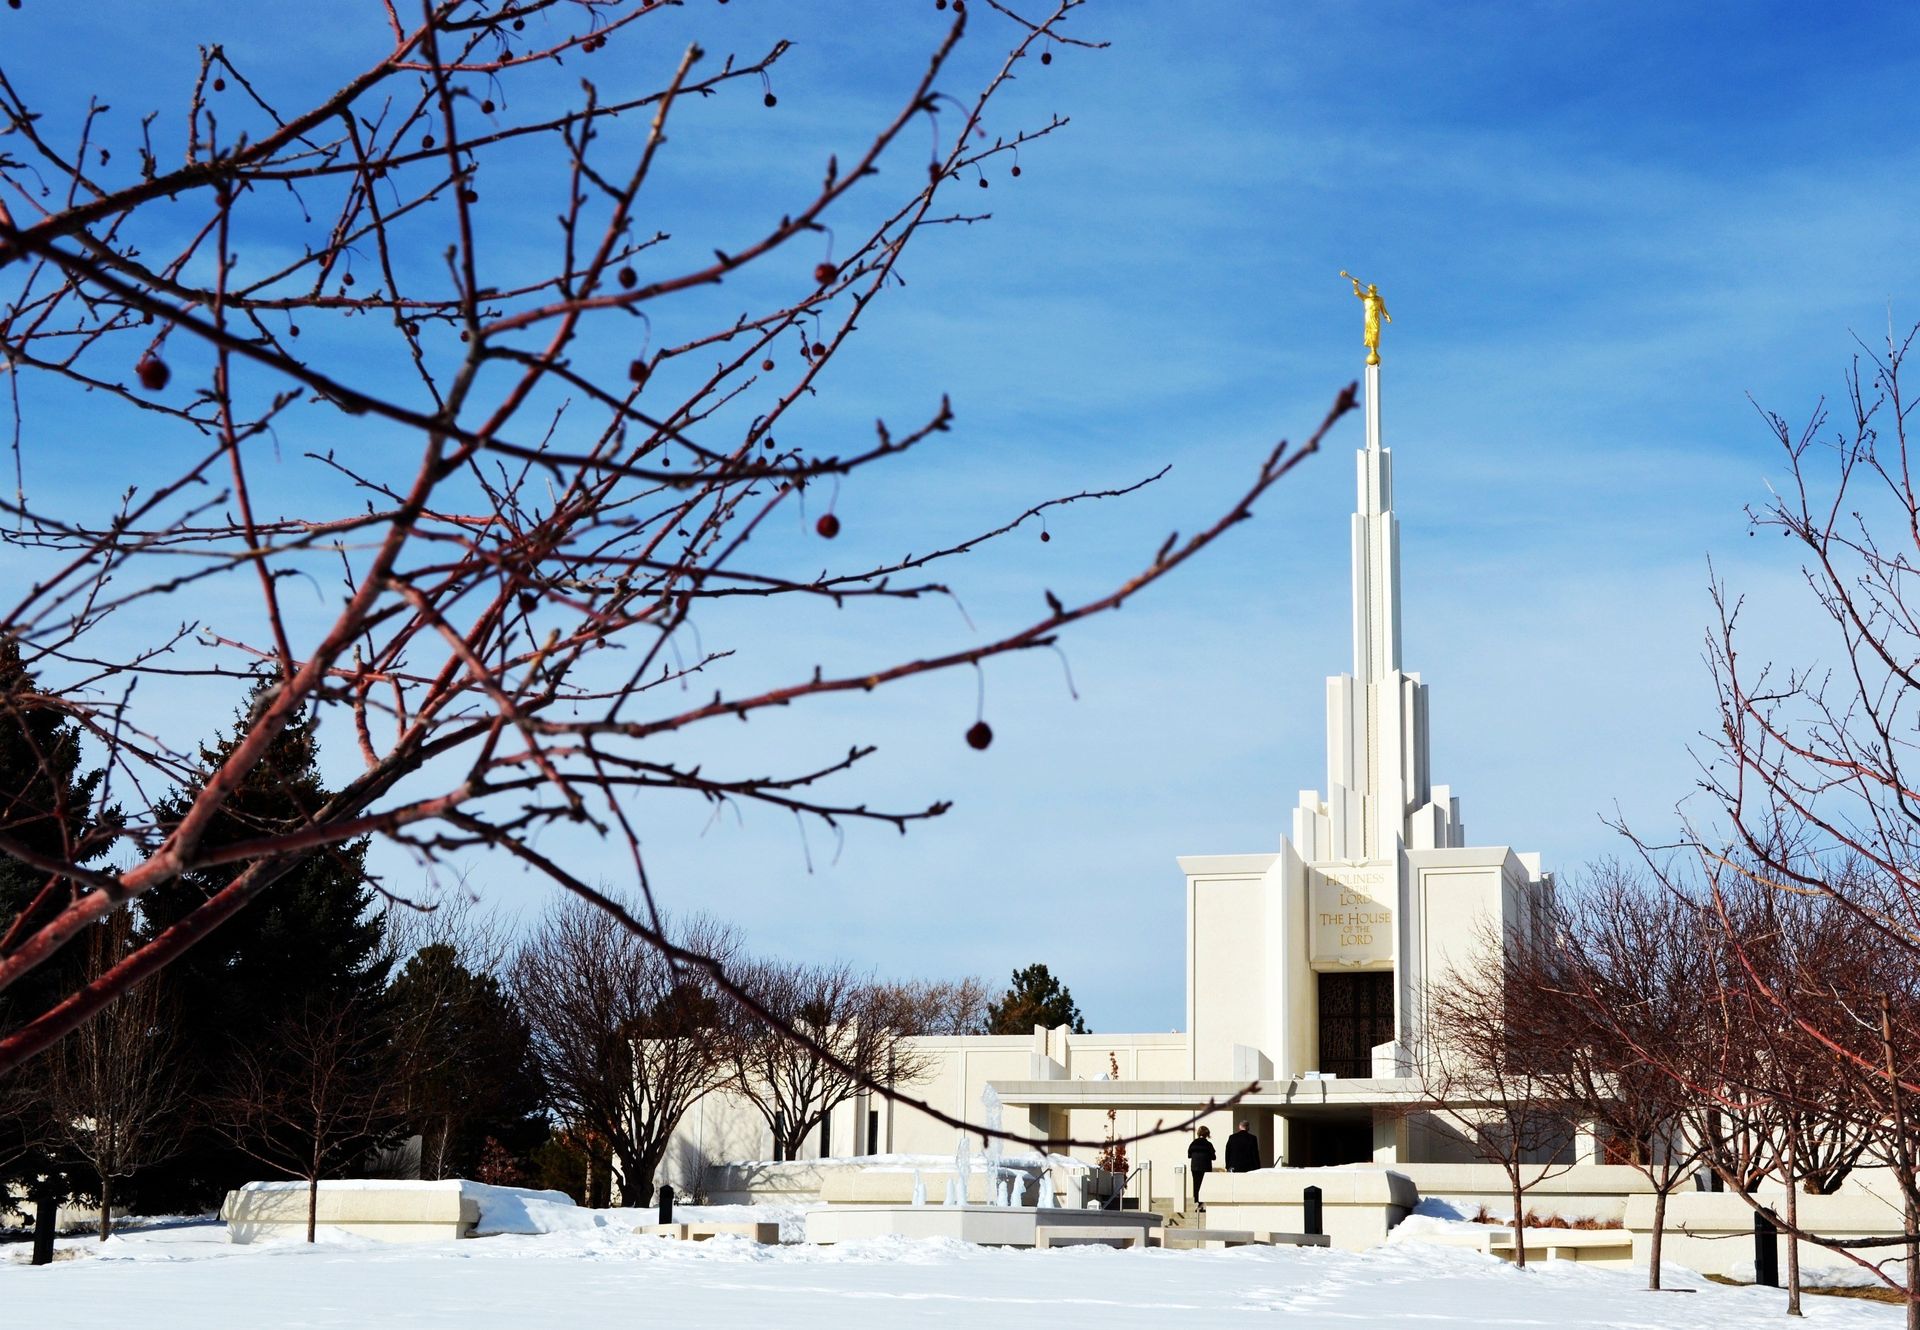 A view of the Denver Colorado Temple and grounds in the wintertime.